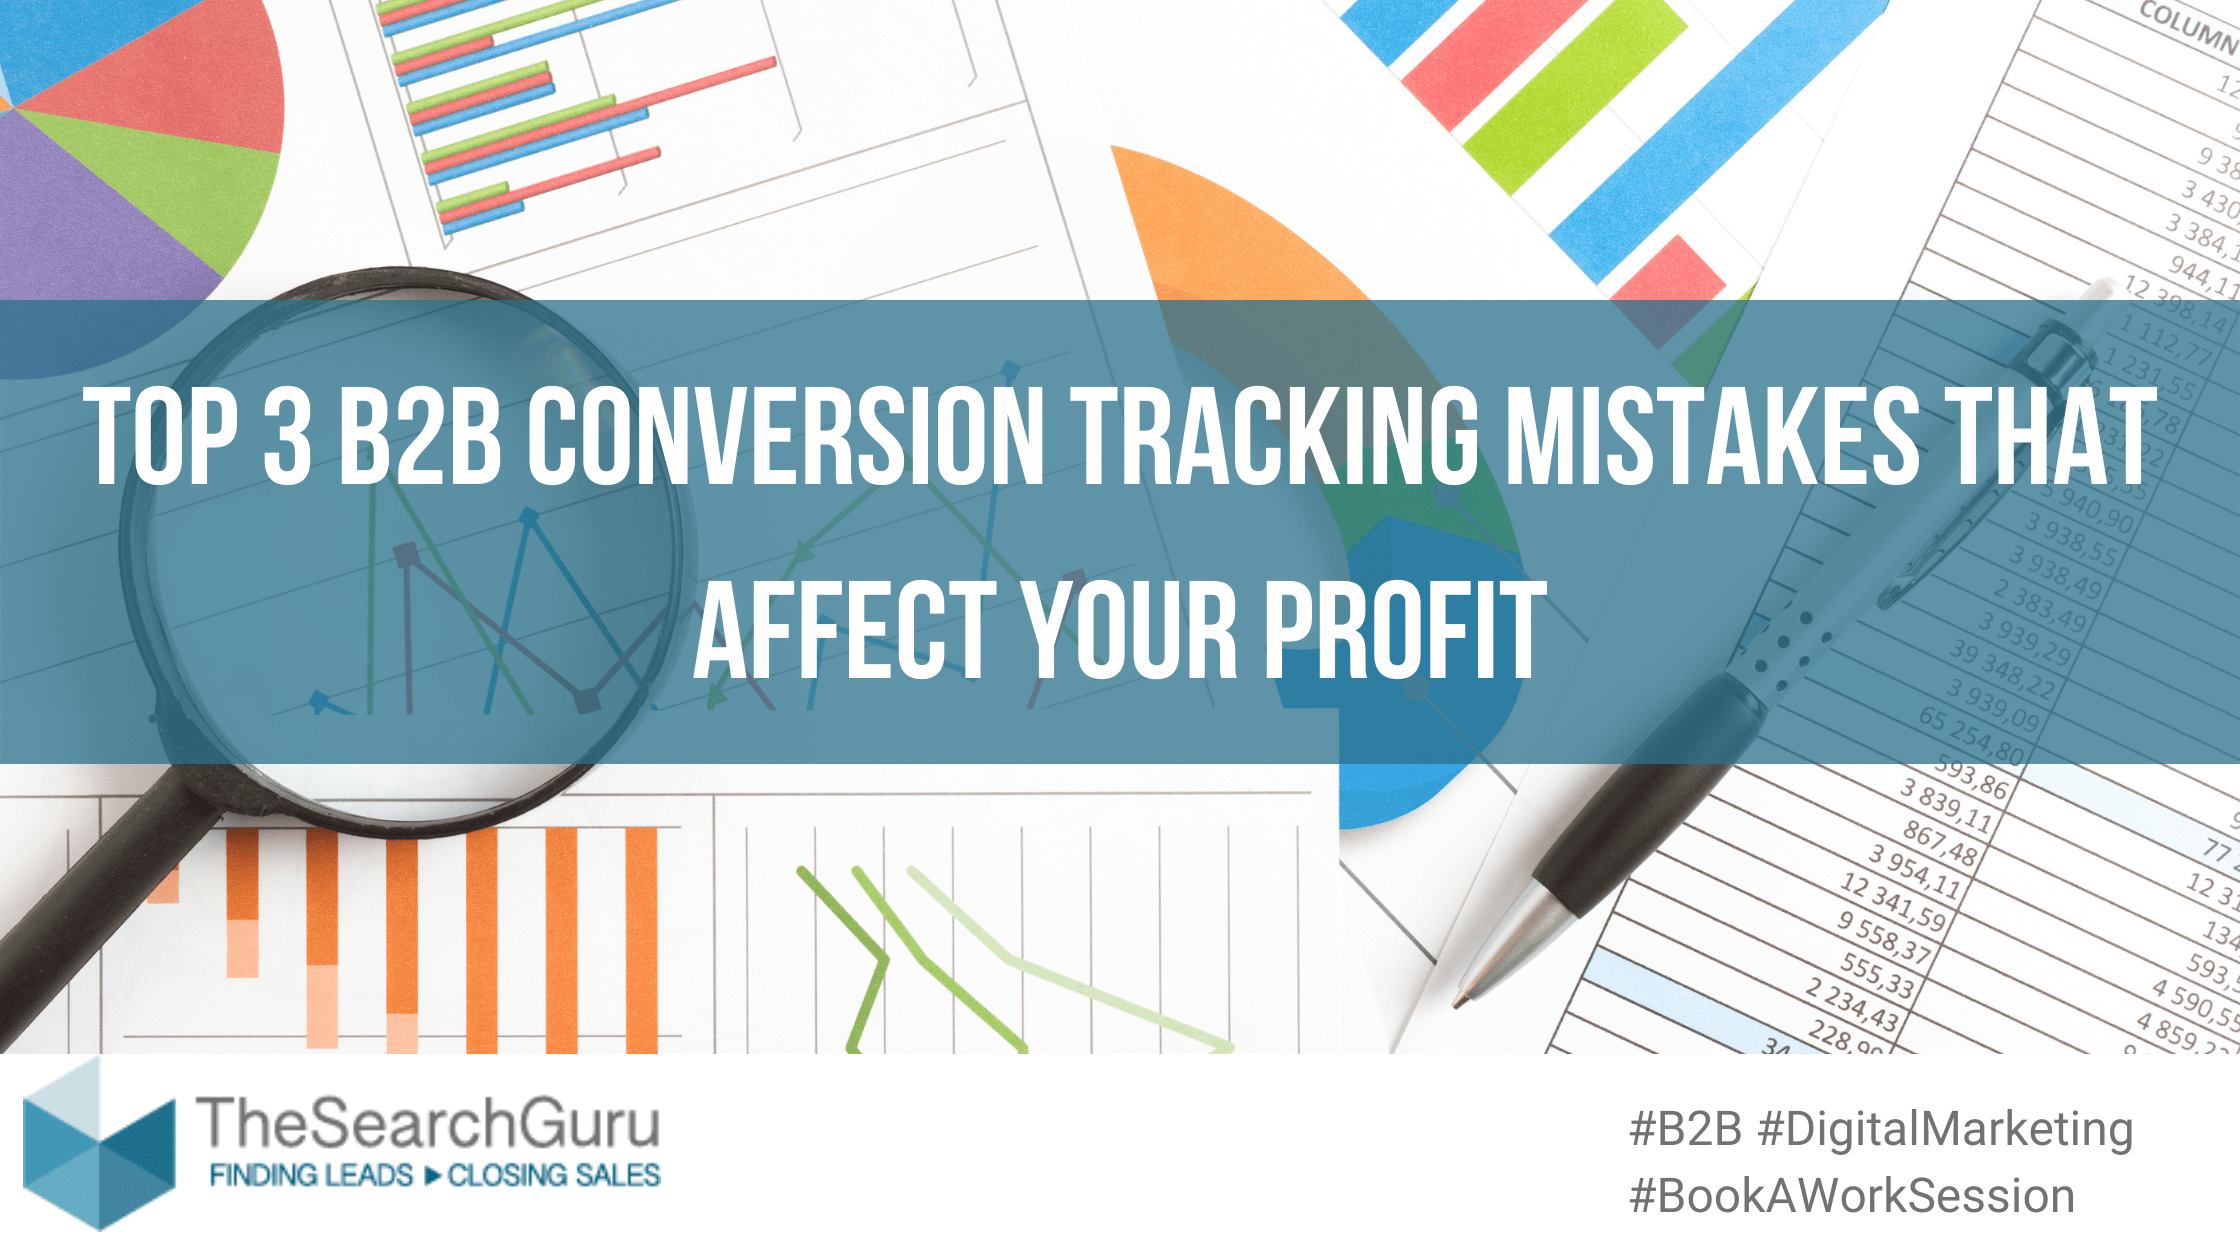 Conversion tracking mistakes